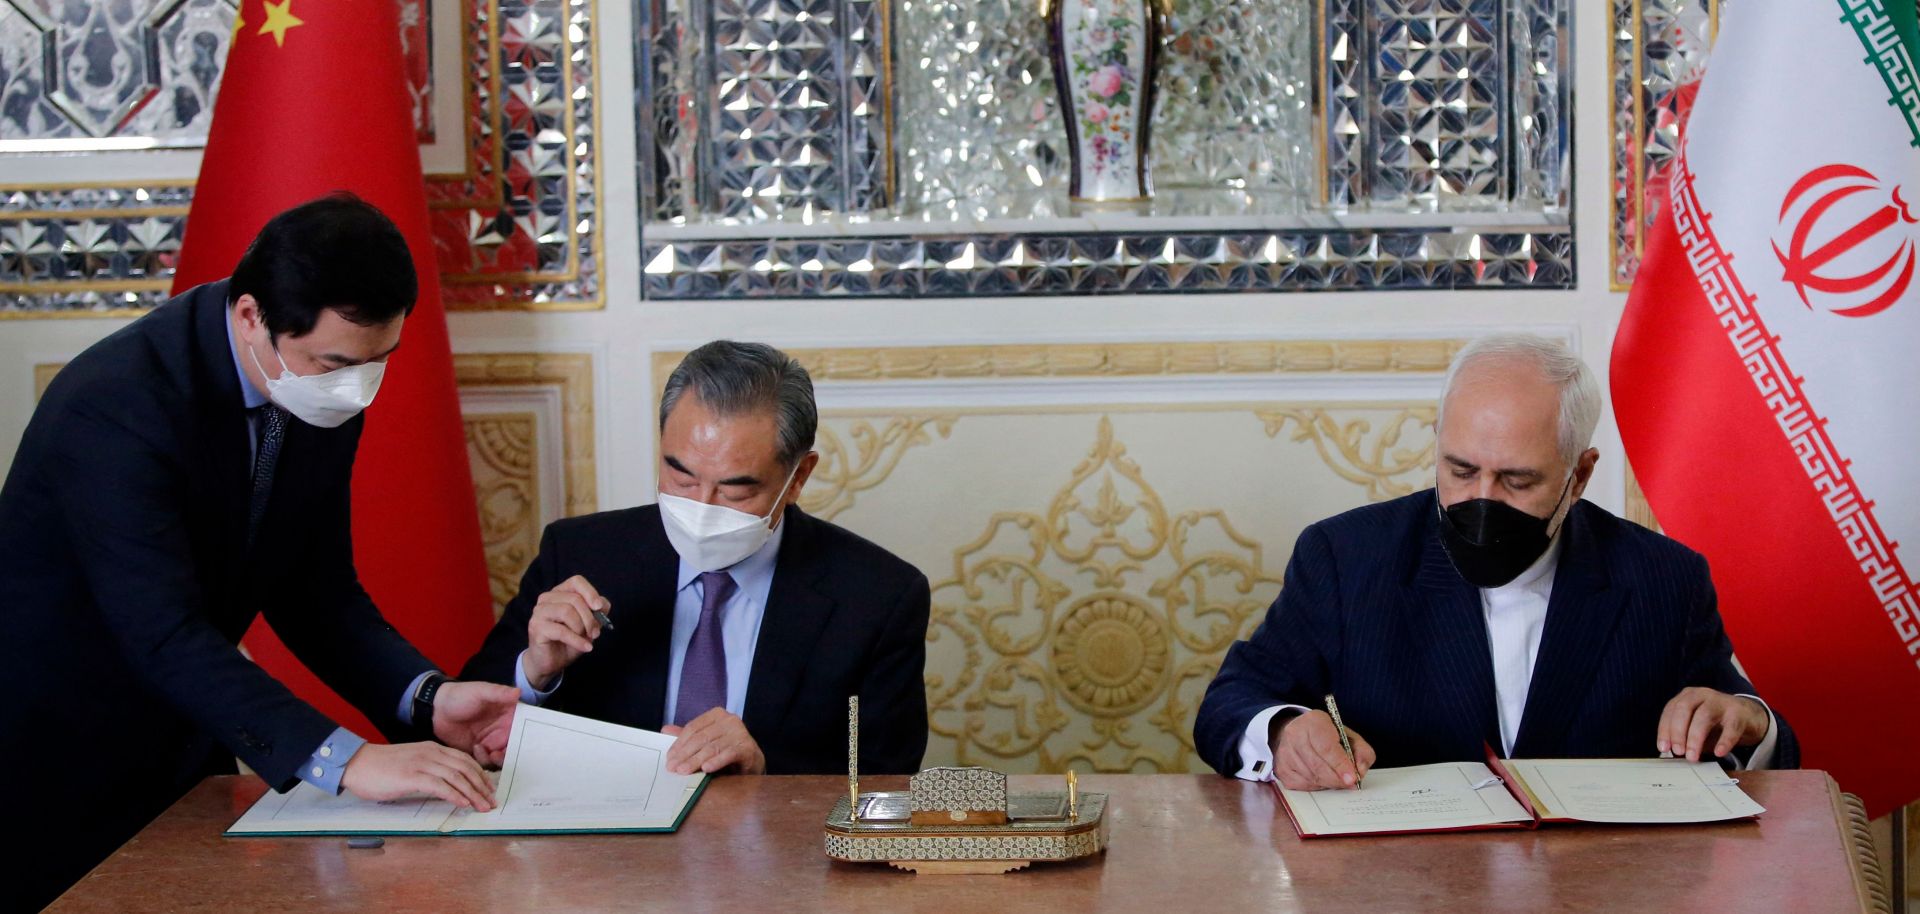 Iran and China’s foreign ministers (right to left) sign a partnership agreement in Tehran on March 27, 2021. 